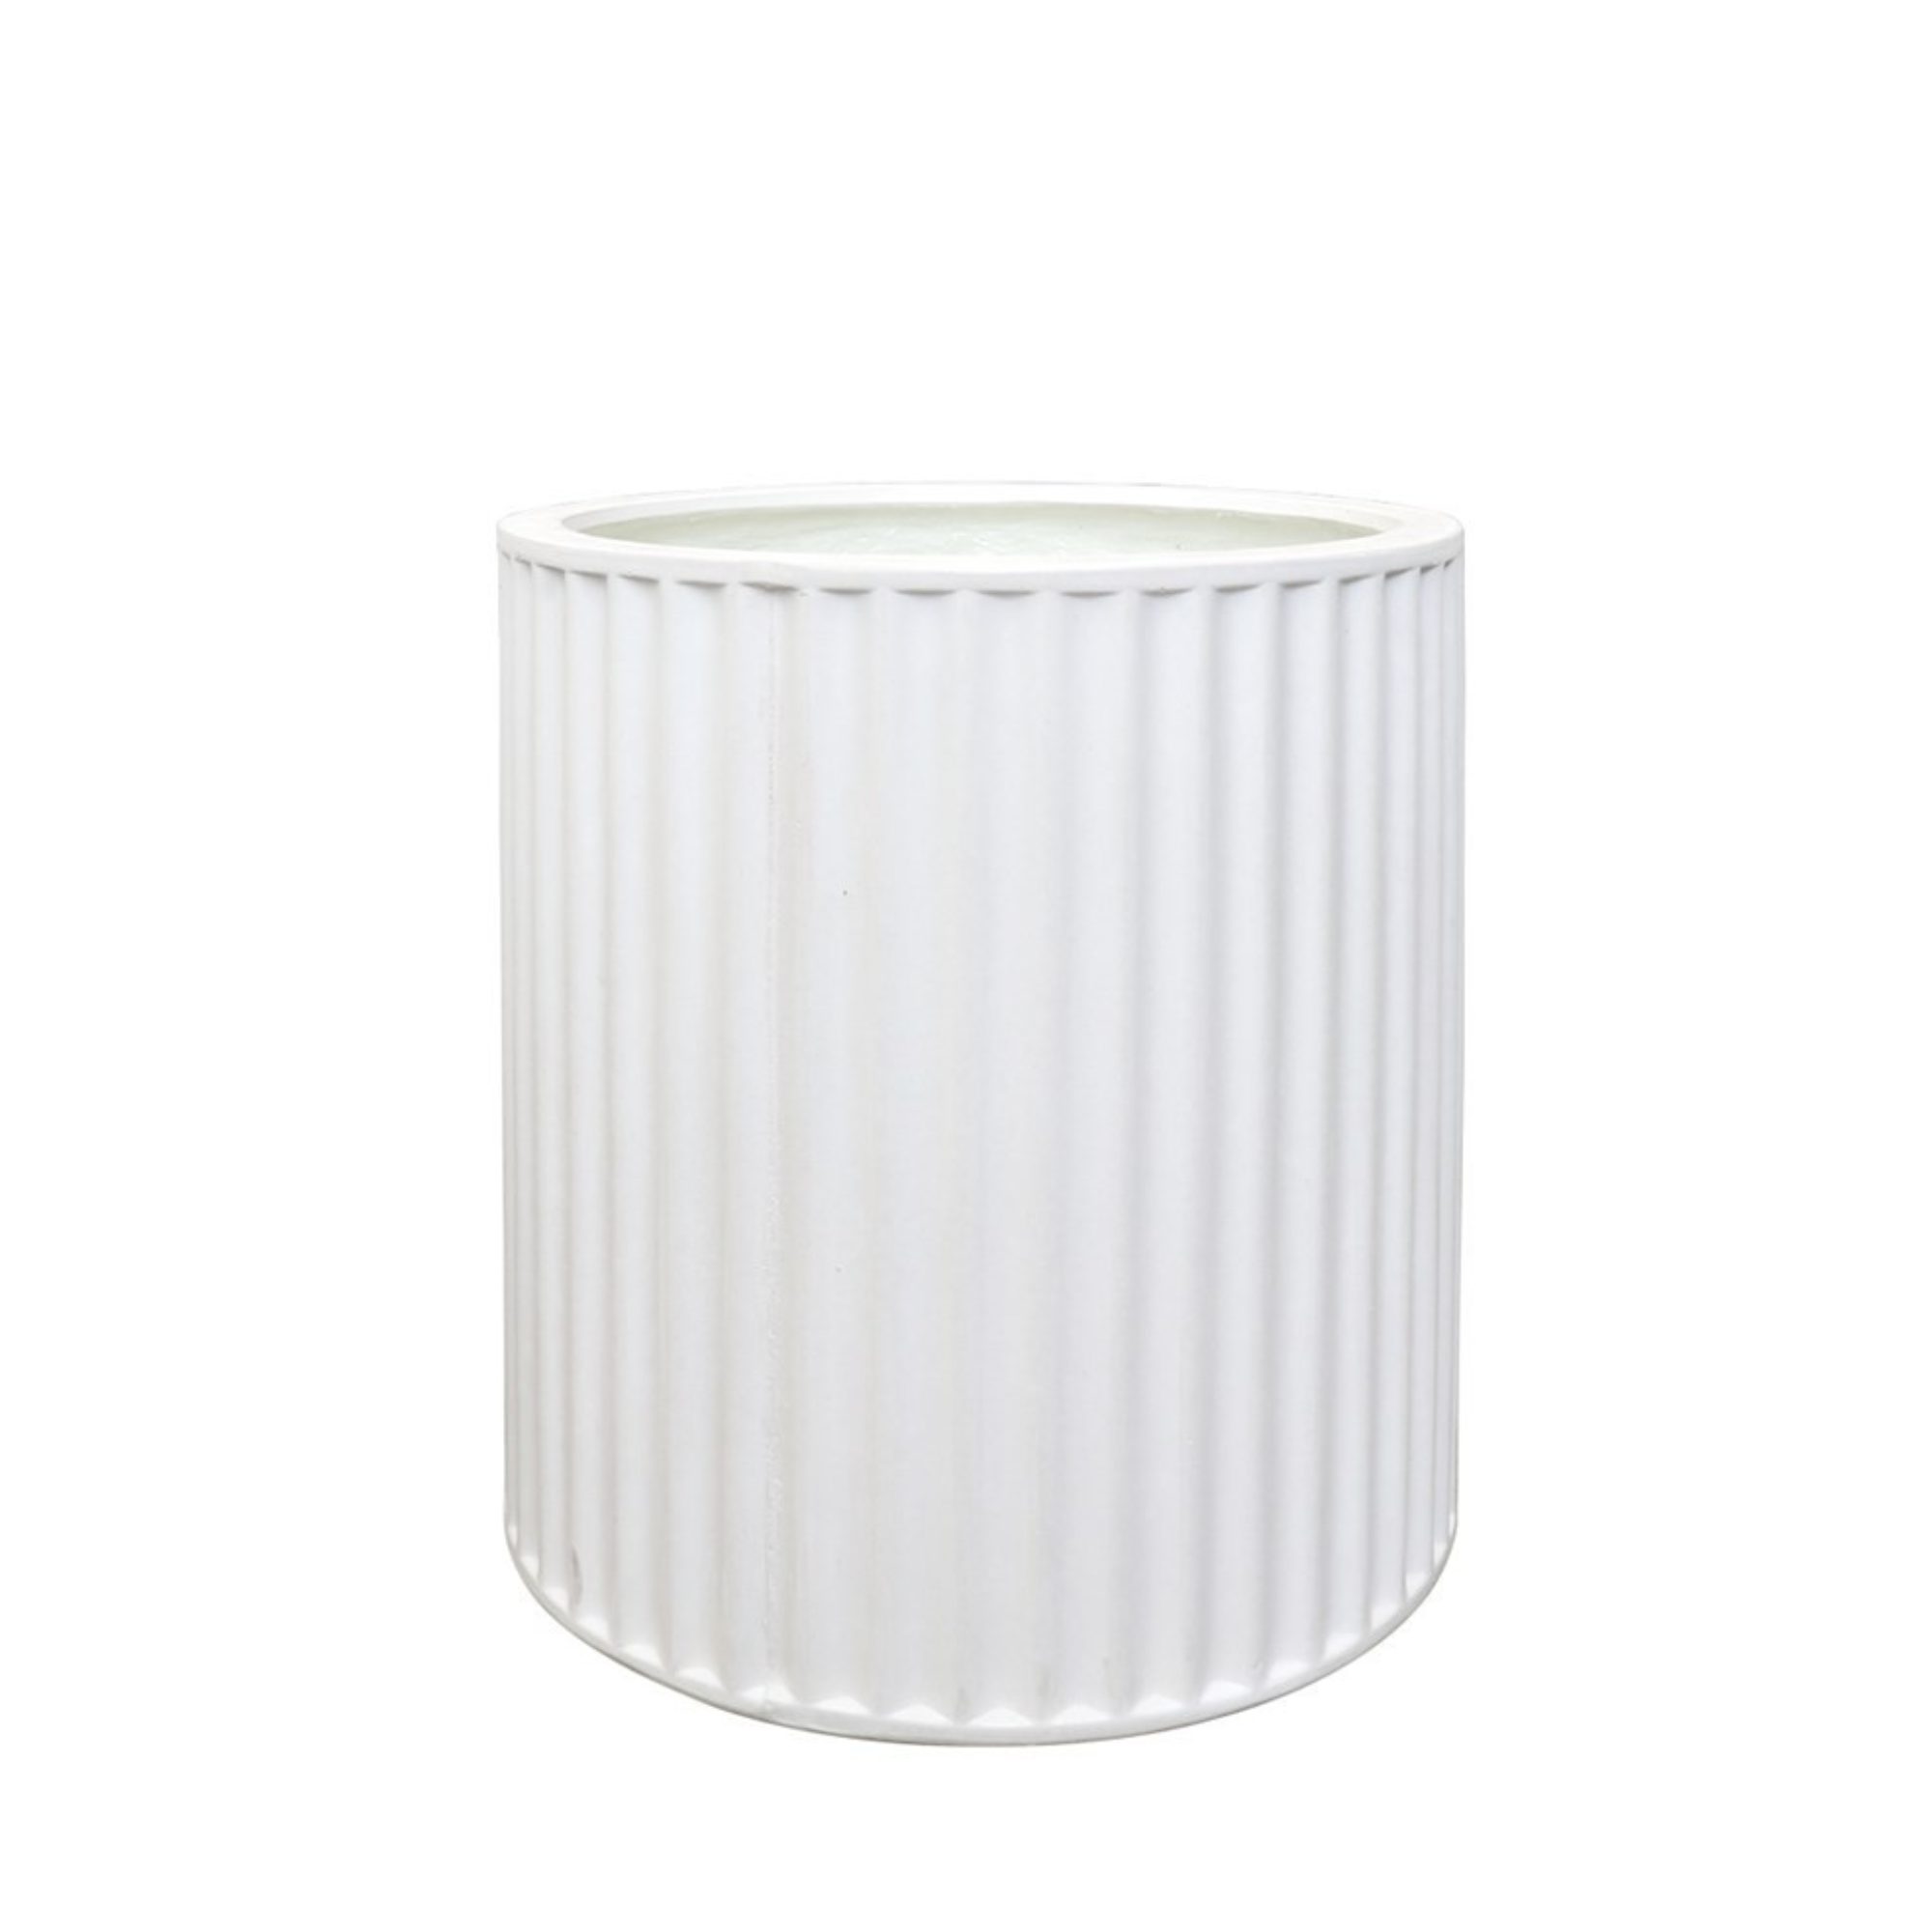 PIAKO RIBBED CYLINDER PLANTER | 3 SIZES | BLACK, WHITE OR WEATHERED CEMENT